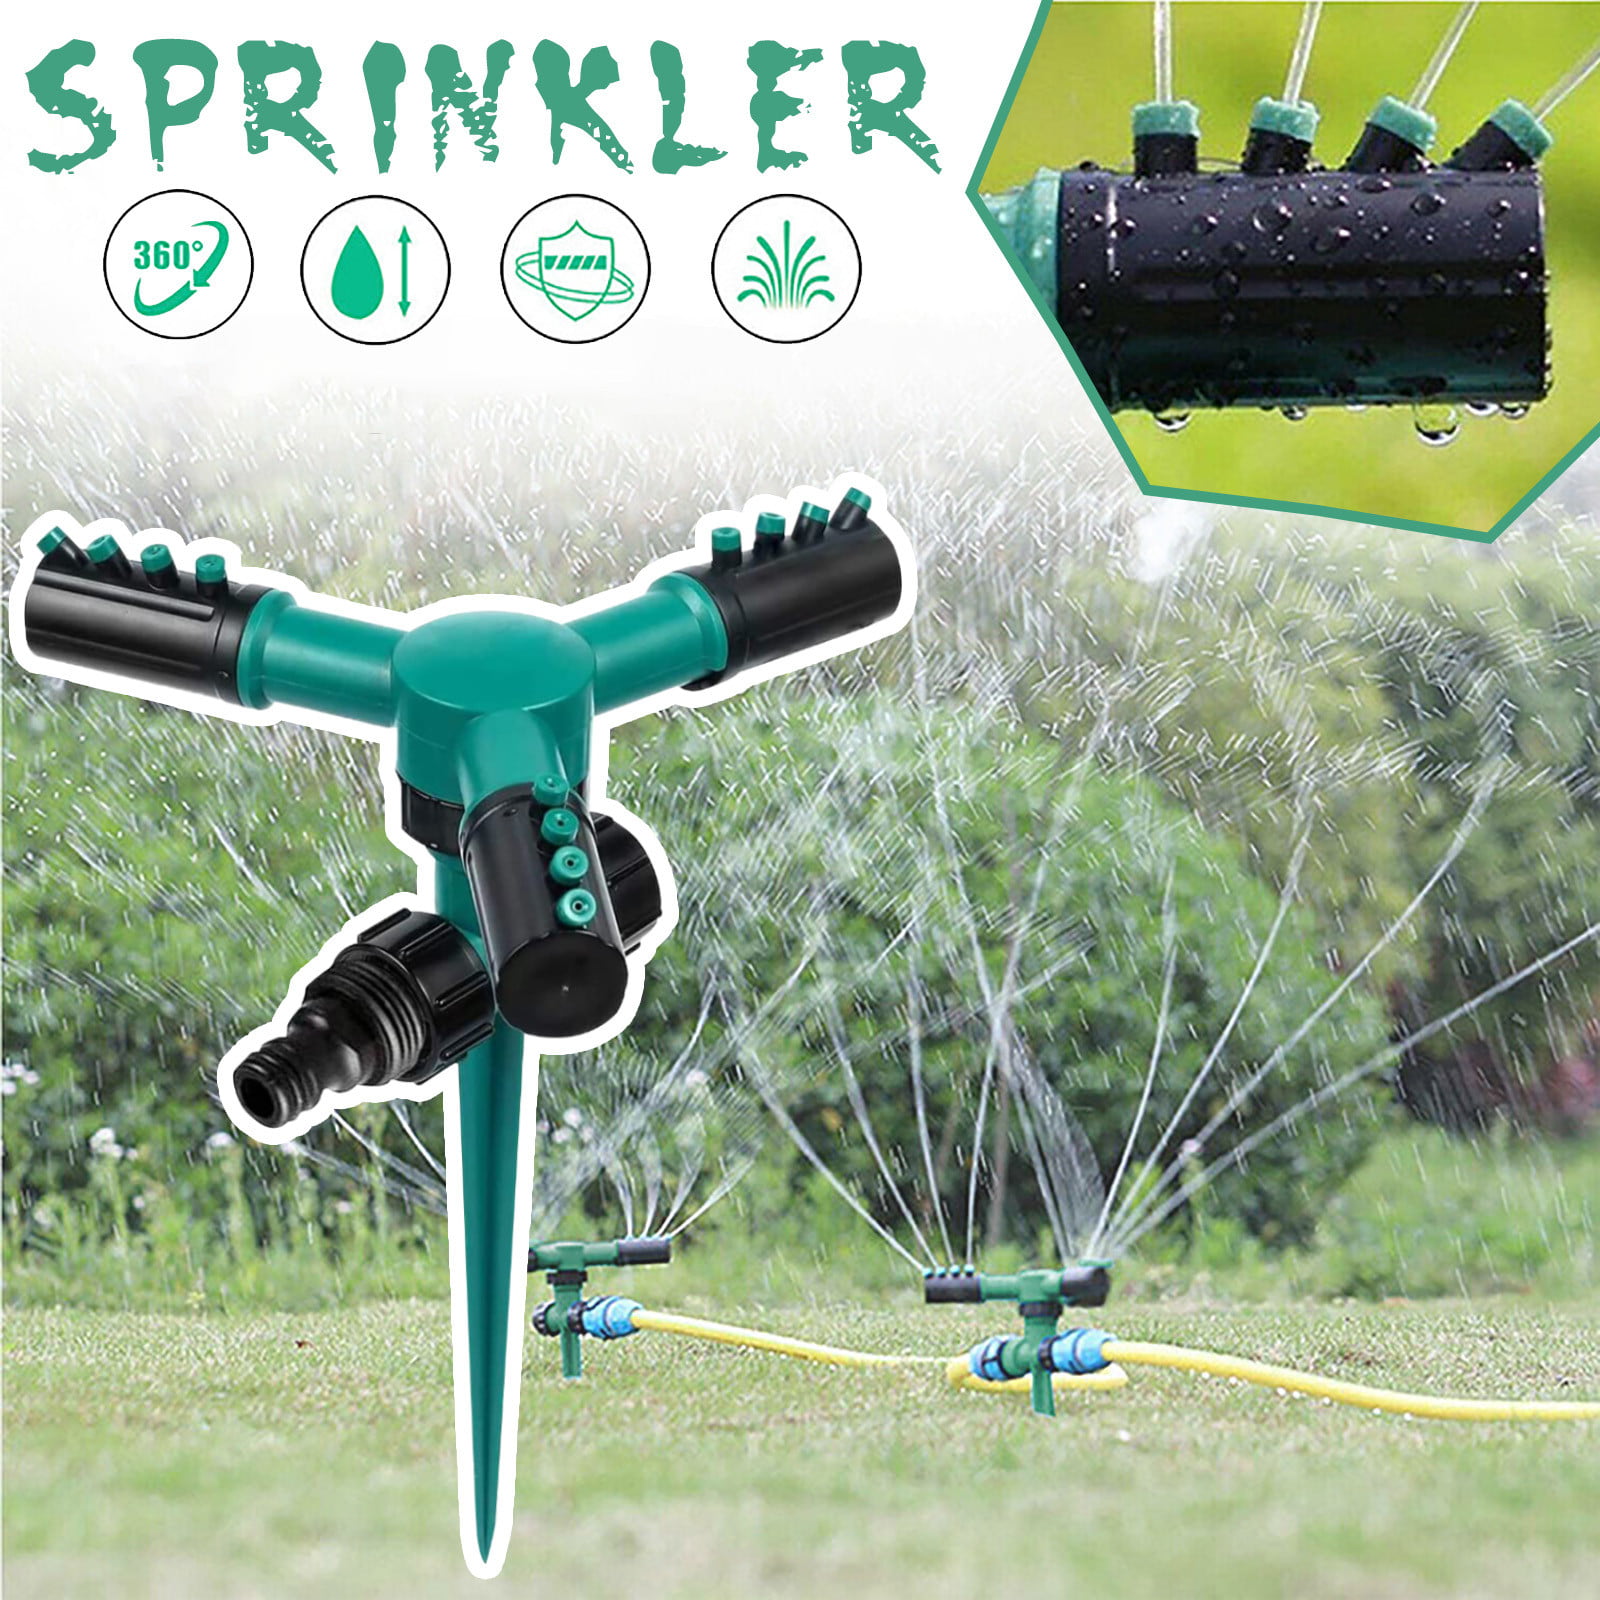 Details about   360° Lawn Circle Rotating Water Sprinkler Garden Pipe Hose Irrigation System Hot 